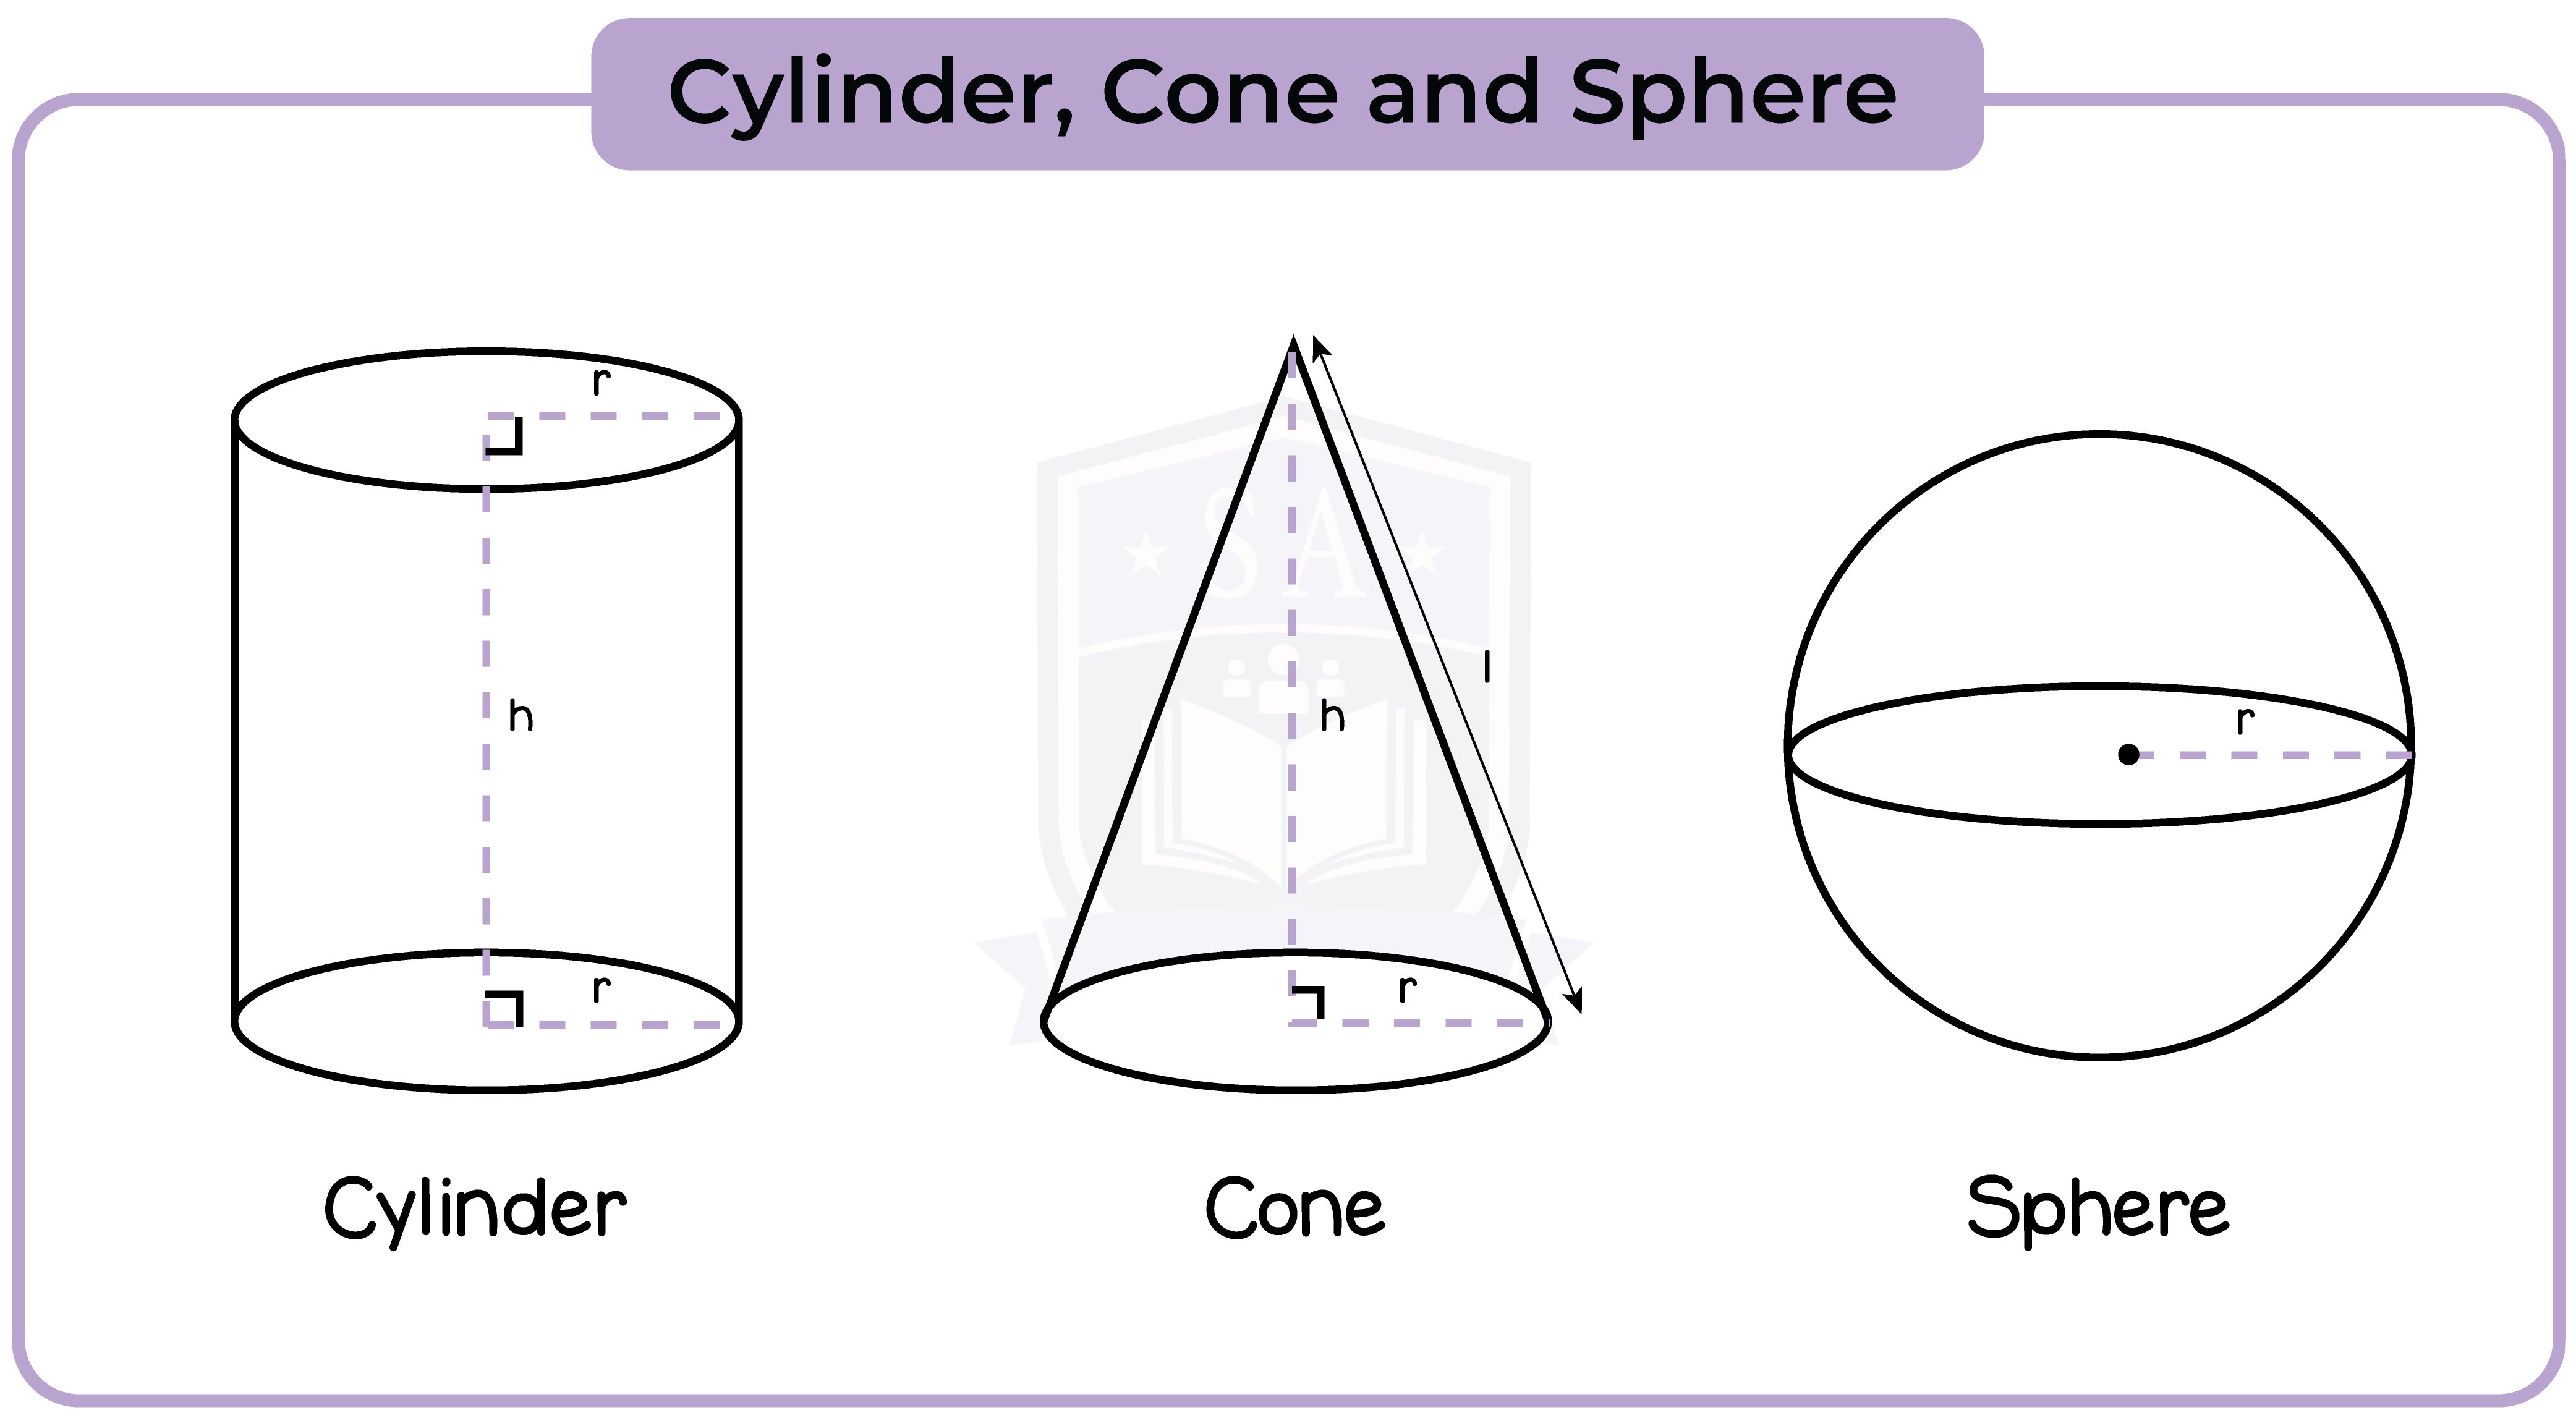 edexcel_igcse_mathematics a_topic 34_3D shapes and volumes_001_Cylinder, Cone and Sphere